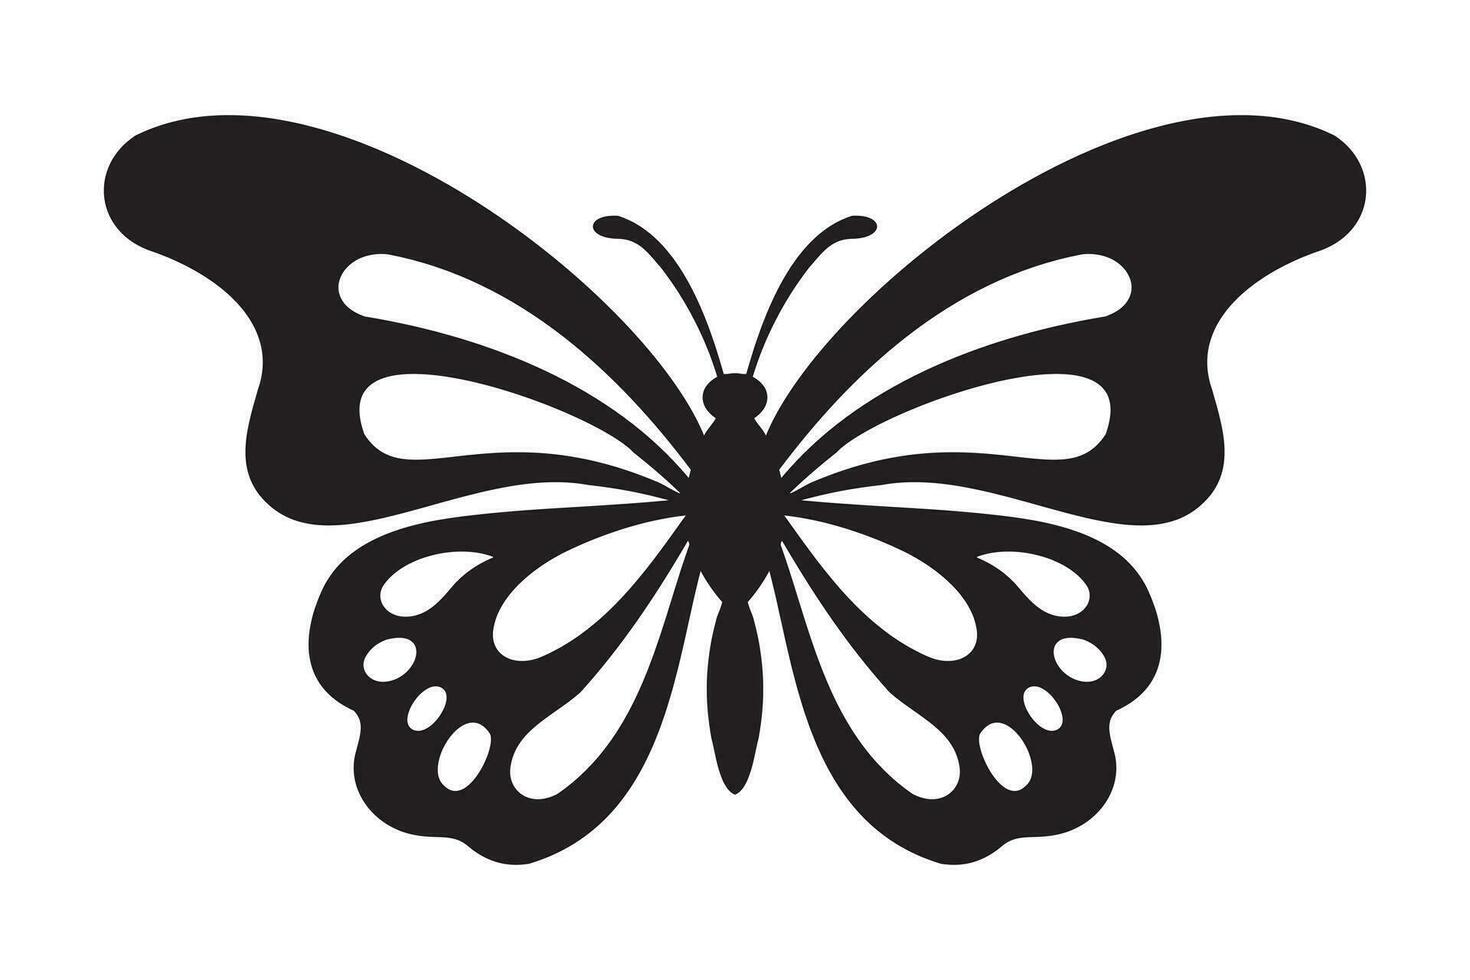 Butterfly tattoo silhouette design, Graphic black icon of butterfly isolated on white background vector